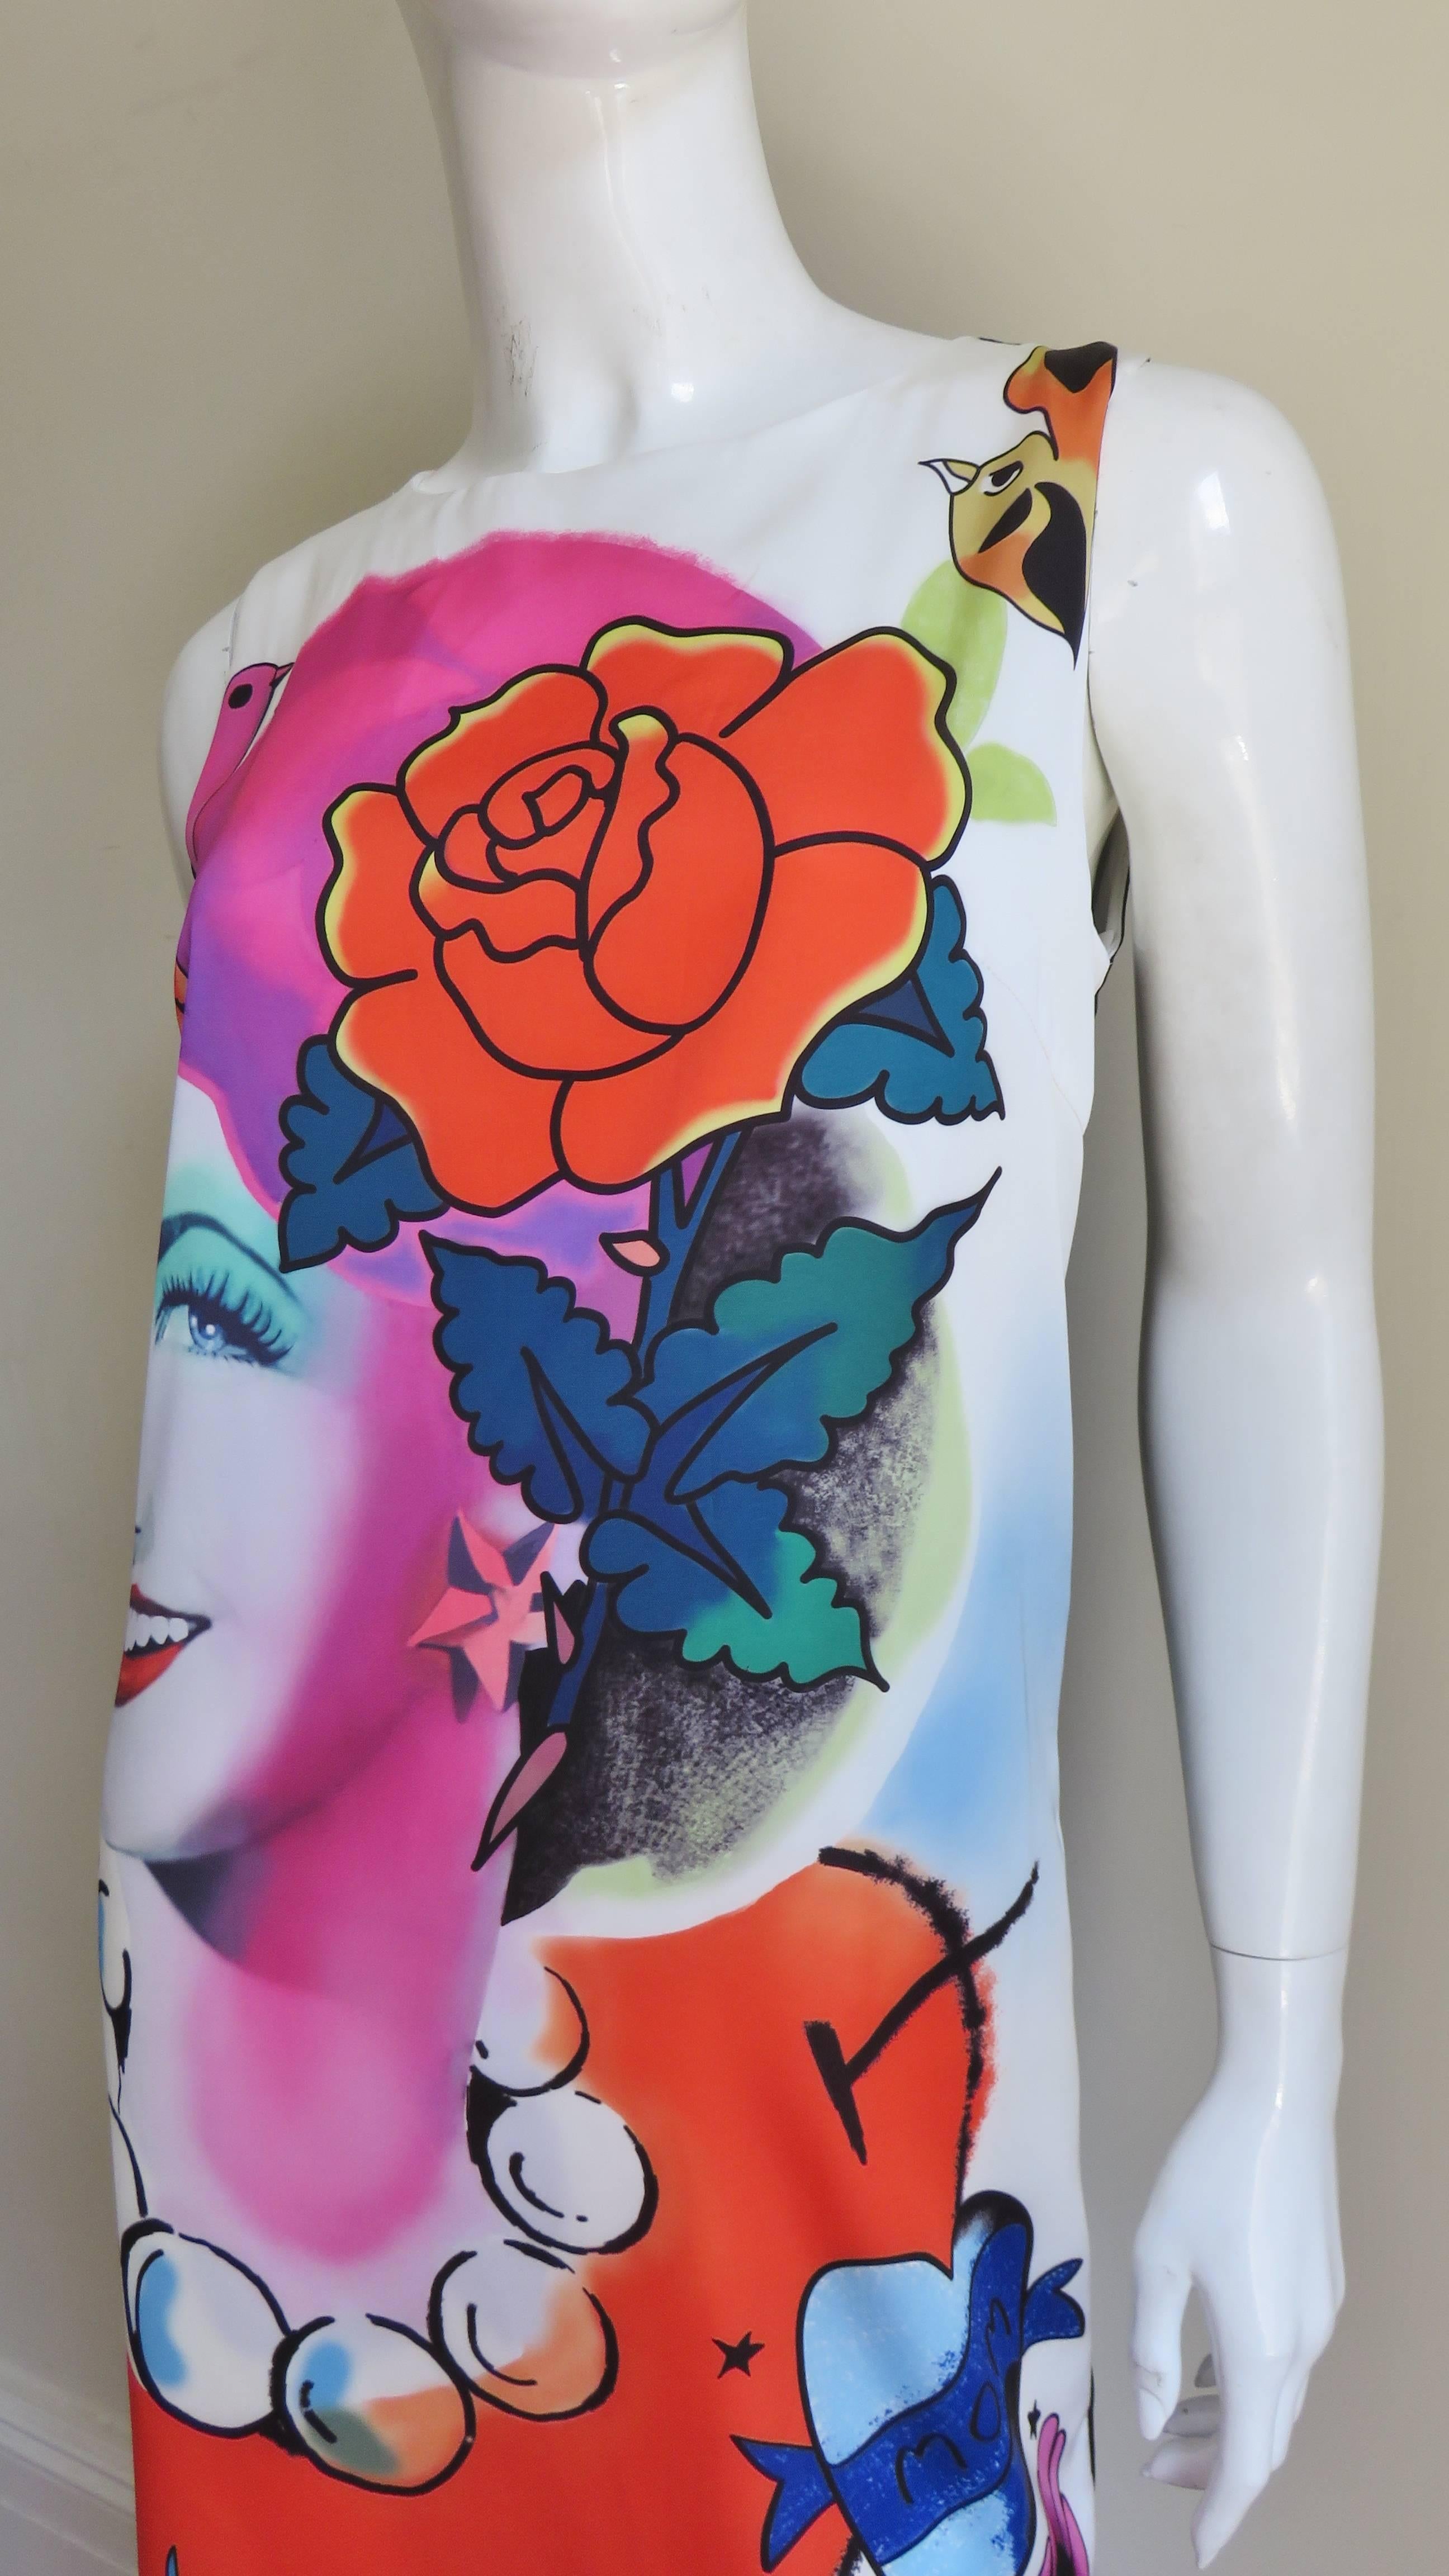 A fabulous dress with a face print from Moschino.  It is adorned on the front with a brightly colored vintage style photo print of a woman's face enhanced with flowers, birds and jewelry.  The dress is a simple sleeveless shift with a key hole back